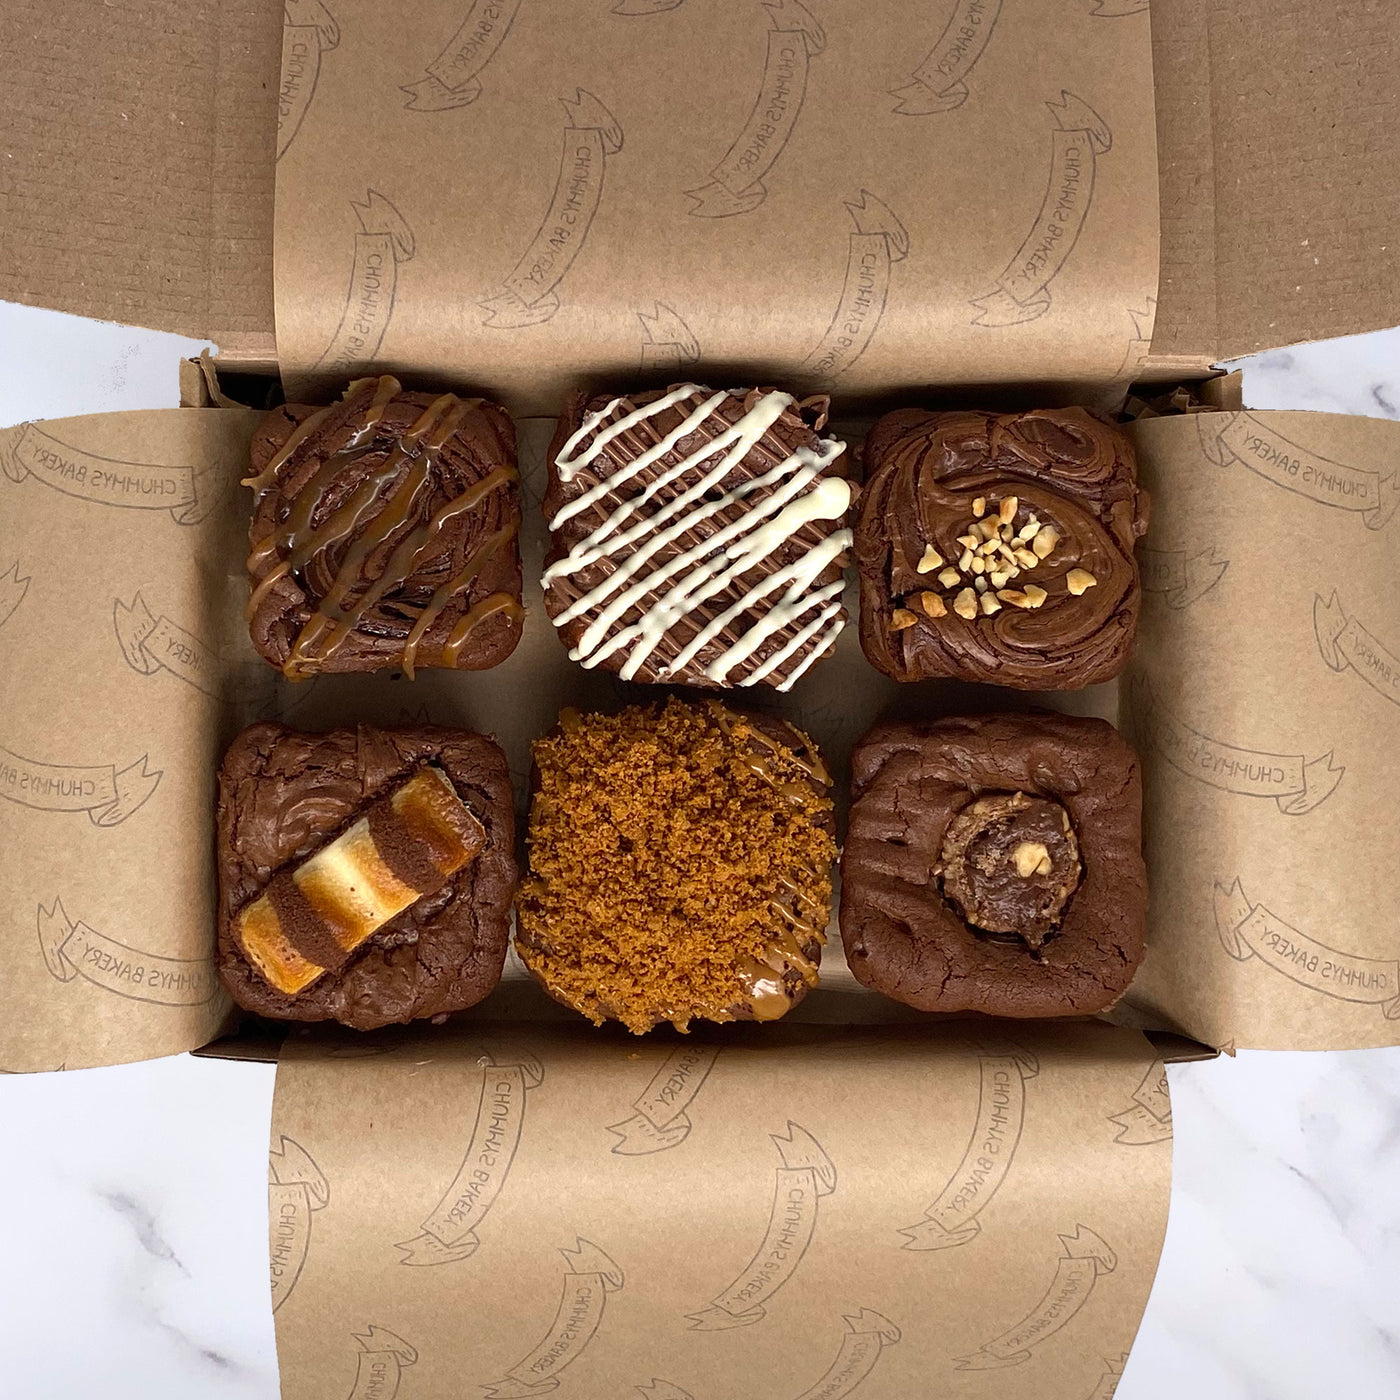 Postal Brownie Subscription Box - Delivered To Your Door - Chummy's Bakery